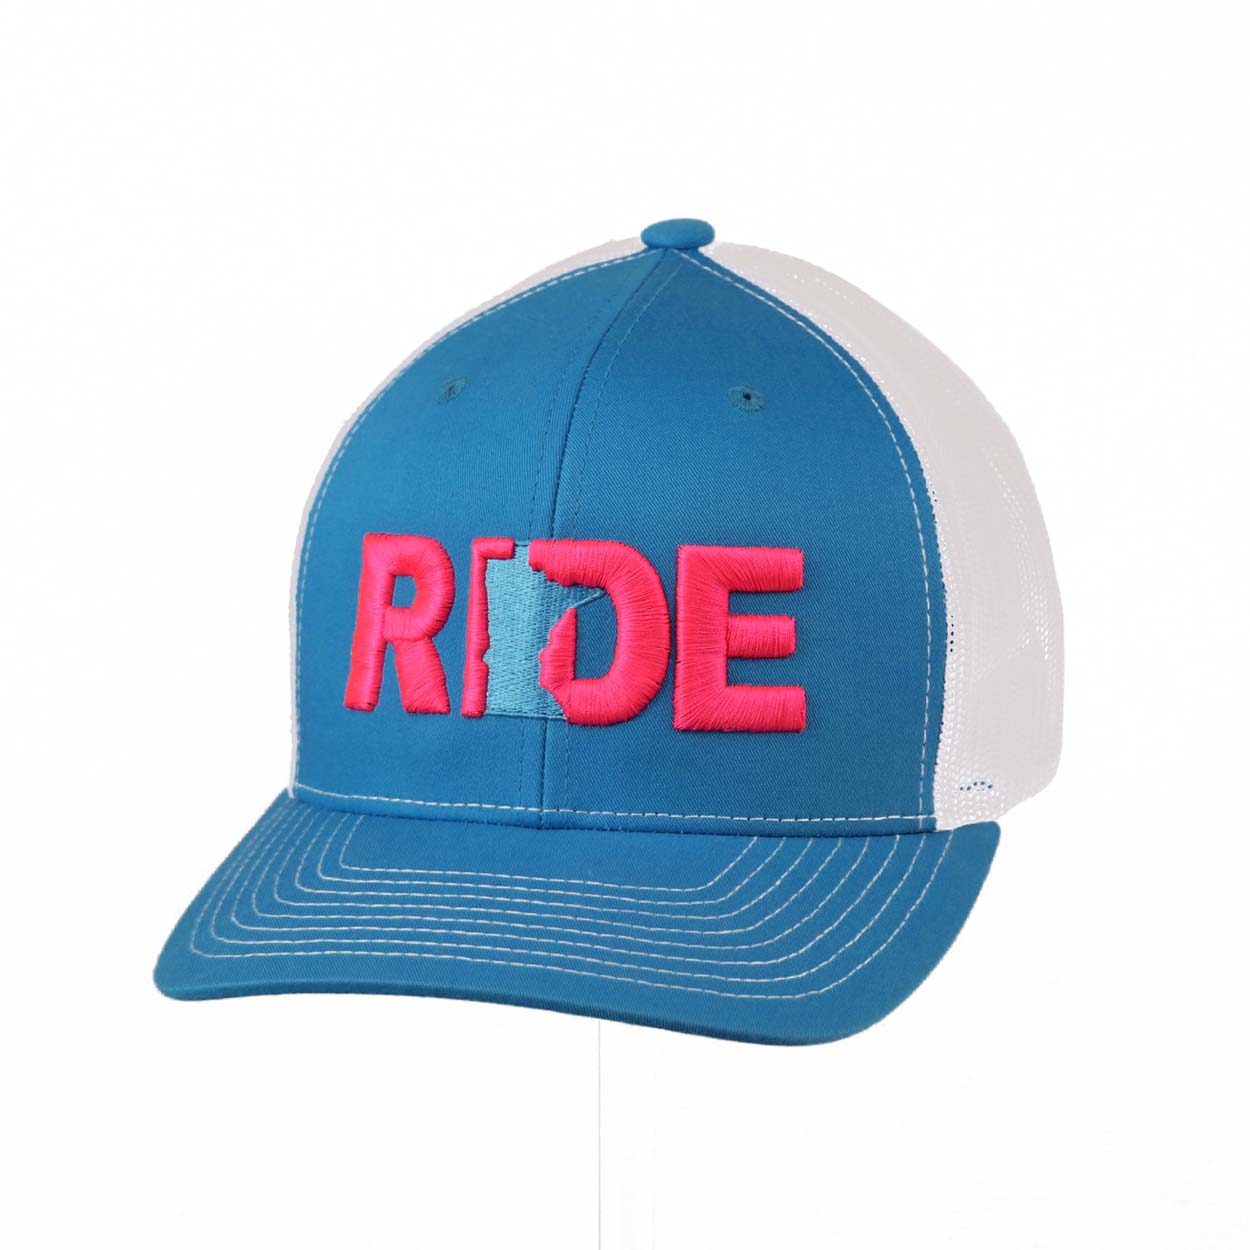 Ride Minnesota Classic Embroidered Snapback Trucker Hat Turquoise/Pink